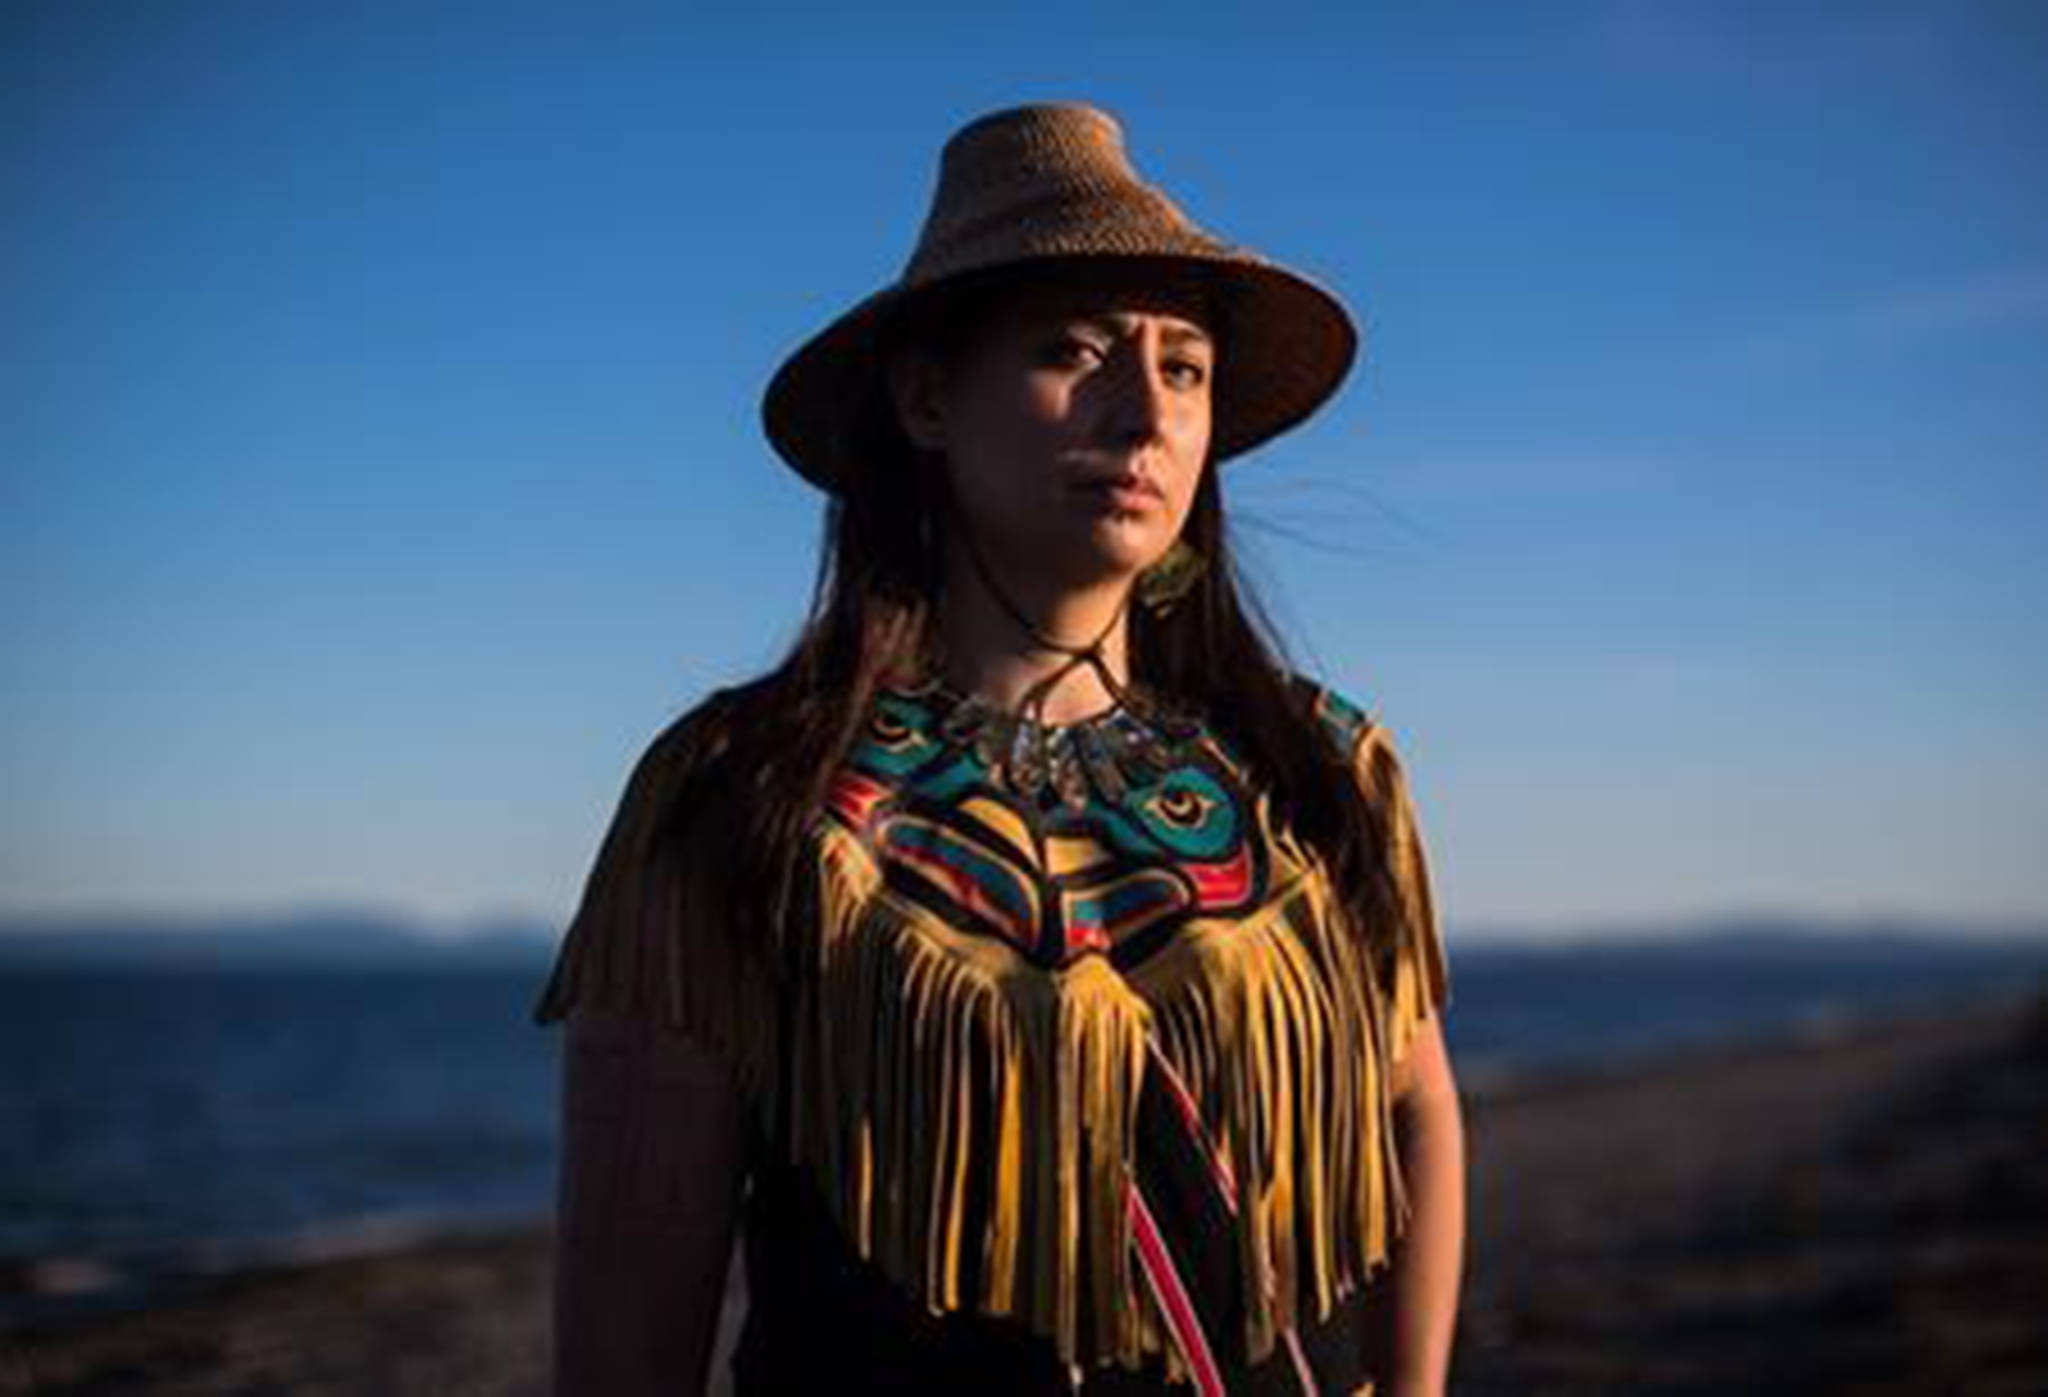 Indigenous woman fights to stay in Canada saying traditional